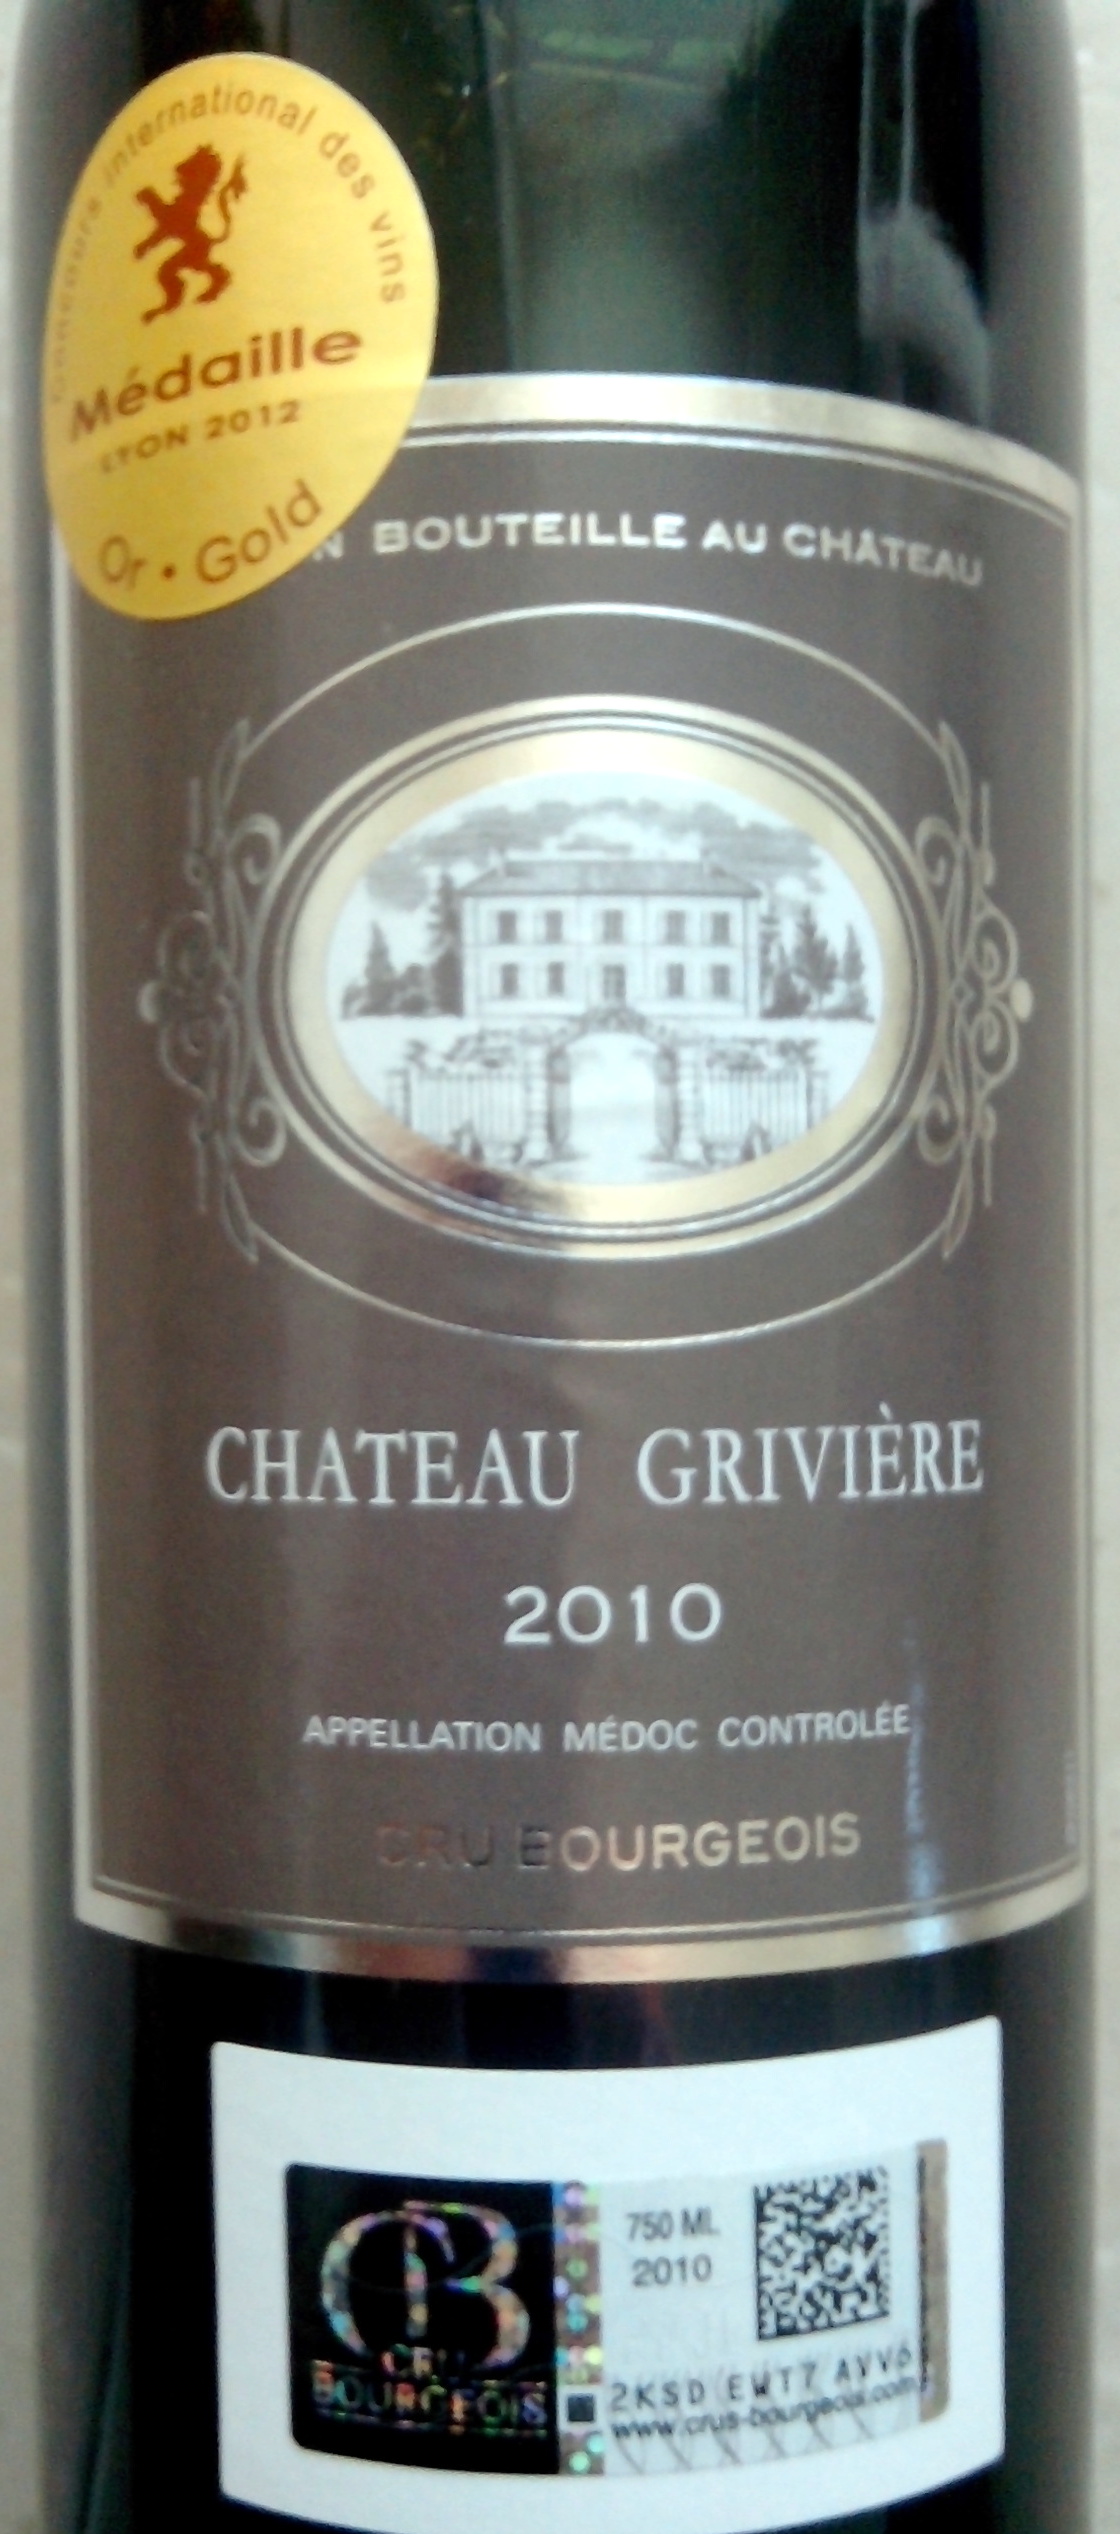 Chateau griviere